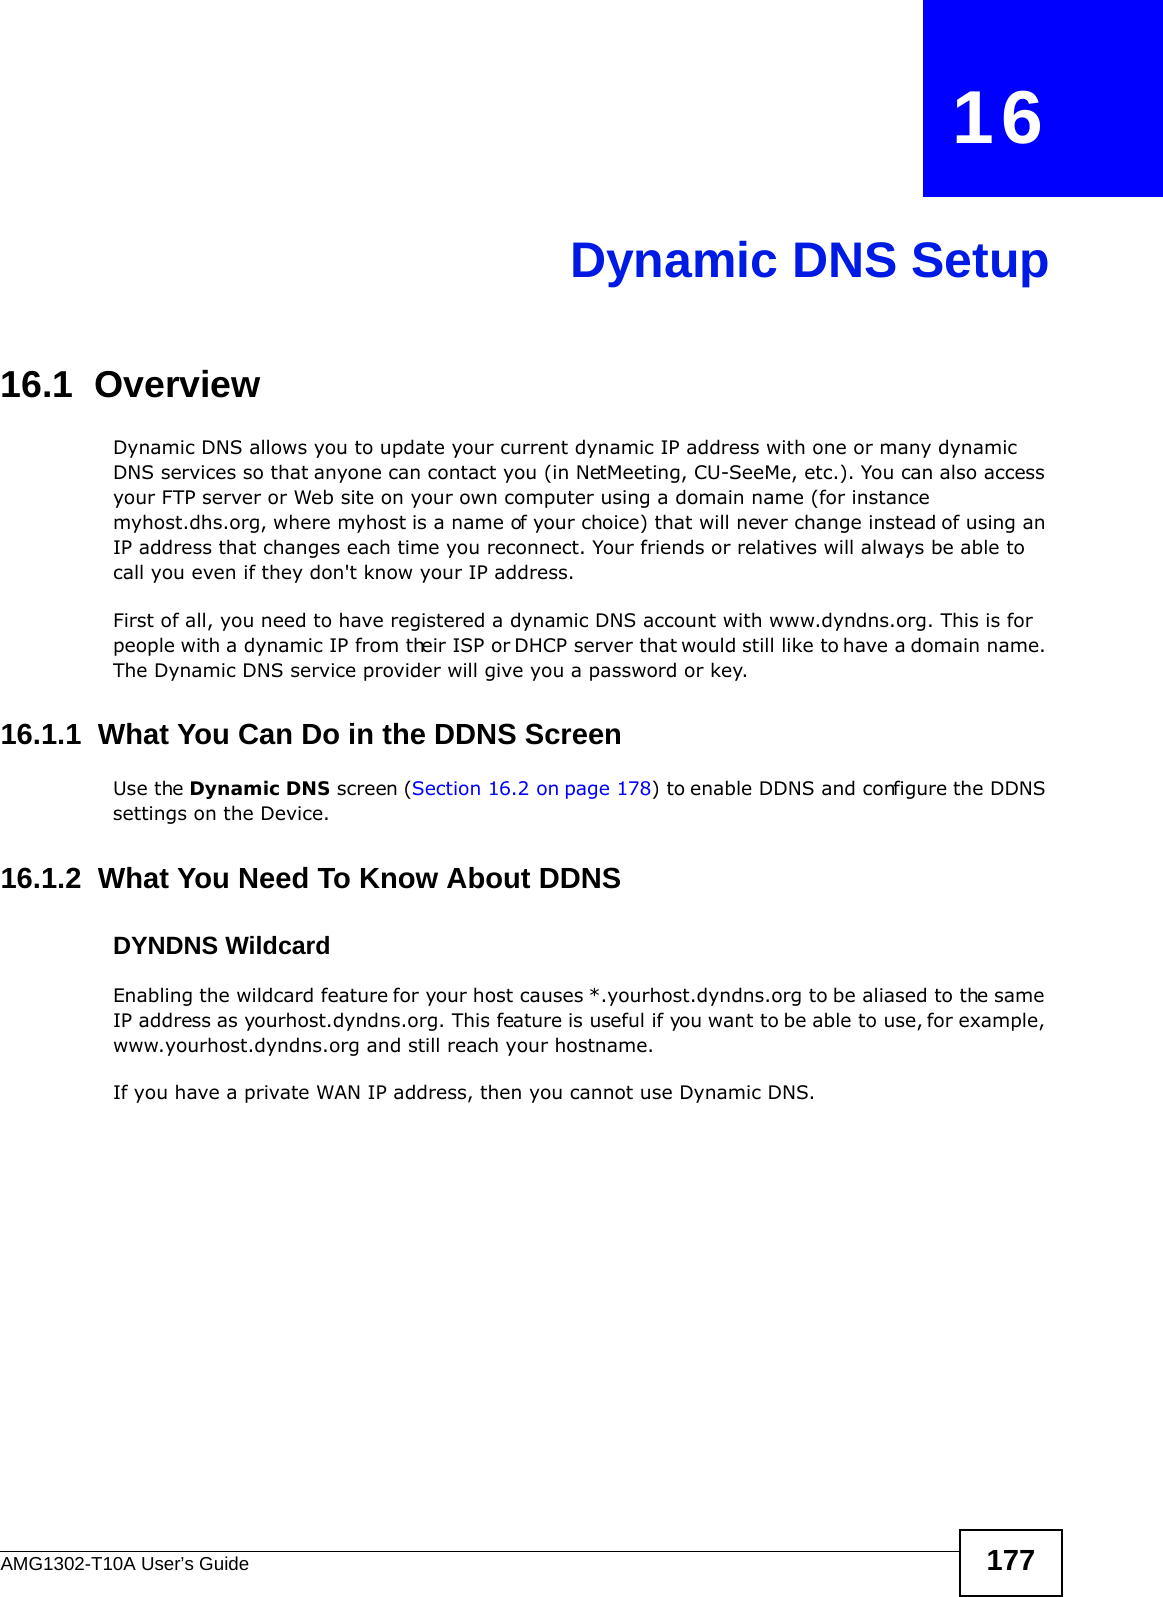 AMG1302-T10A User’s Guide 177CHAPTER   16Dynamic DNS Setup16.1  Overview Dynamic DNS allows you to update your current dynamic IP address with one or many dynamic DNS services so that anyone can contact you (in NetMeeting, CU-SeeMe, etc.). You can also access your FTP server or Web site on your own computer using a domain name (for instance myhost.dhs.org, where myhost is a name of your choice) that will never change instead of using an IP address that changes each time you reconnect. Your friends or relatives will always be able to call you even if they don&apos;t know your IP address.First of all, you need to have registered a dynamic DNS account with www.dyndns.org. This is for people with a dynamic IP from their ISP or DHCP server that would still like to have a domain name. The Dynamic DNS service provider will give you a password or key. 16.1.1  What You Can Do in the DDNS ScreenUse the Dynamic DNS screen (Section 16.2 on page 178) to enable DDNS and configure the DDNS settings on the Device.16.1.2  What You Need To Know About DDNSDYNDNS WildcardEnabling the wildcard feature for your host causes *.yourhost.dyndns.org to be aliased to the same IP address as yourhost.dyndns.org. This feature is useful if you want to be able to use, for example, www.yourhost.dyndns.org and still reach your hostname.If you have a private WAN IP address, then you cannot use Dynamic DNS.